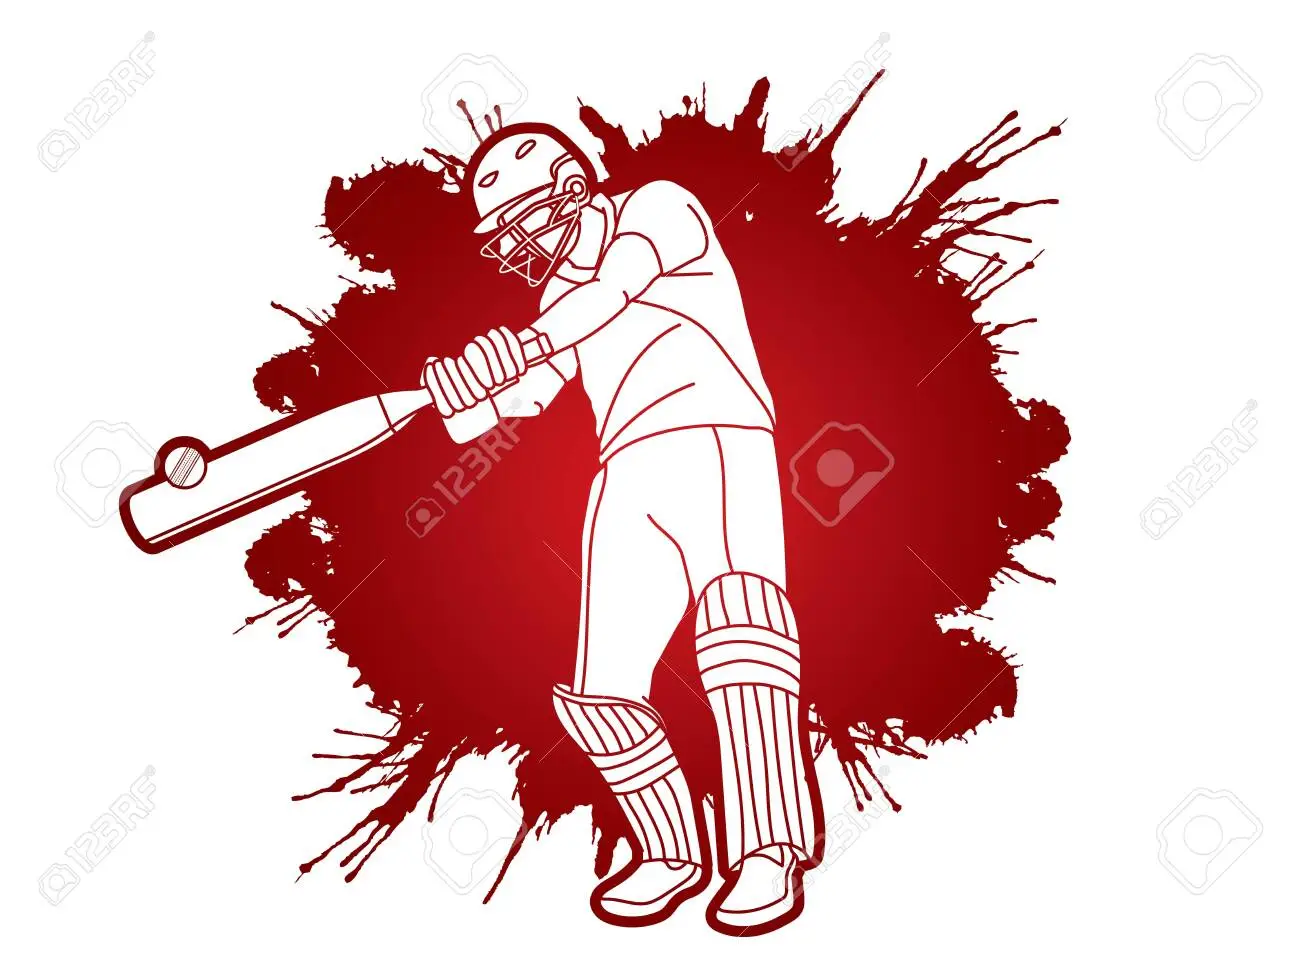 Cricket player action cartoon sport graphic vector royalty free svg cliparts vectors and stock illustration image